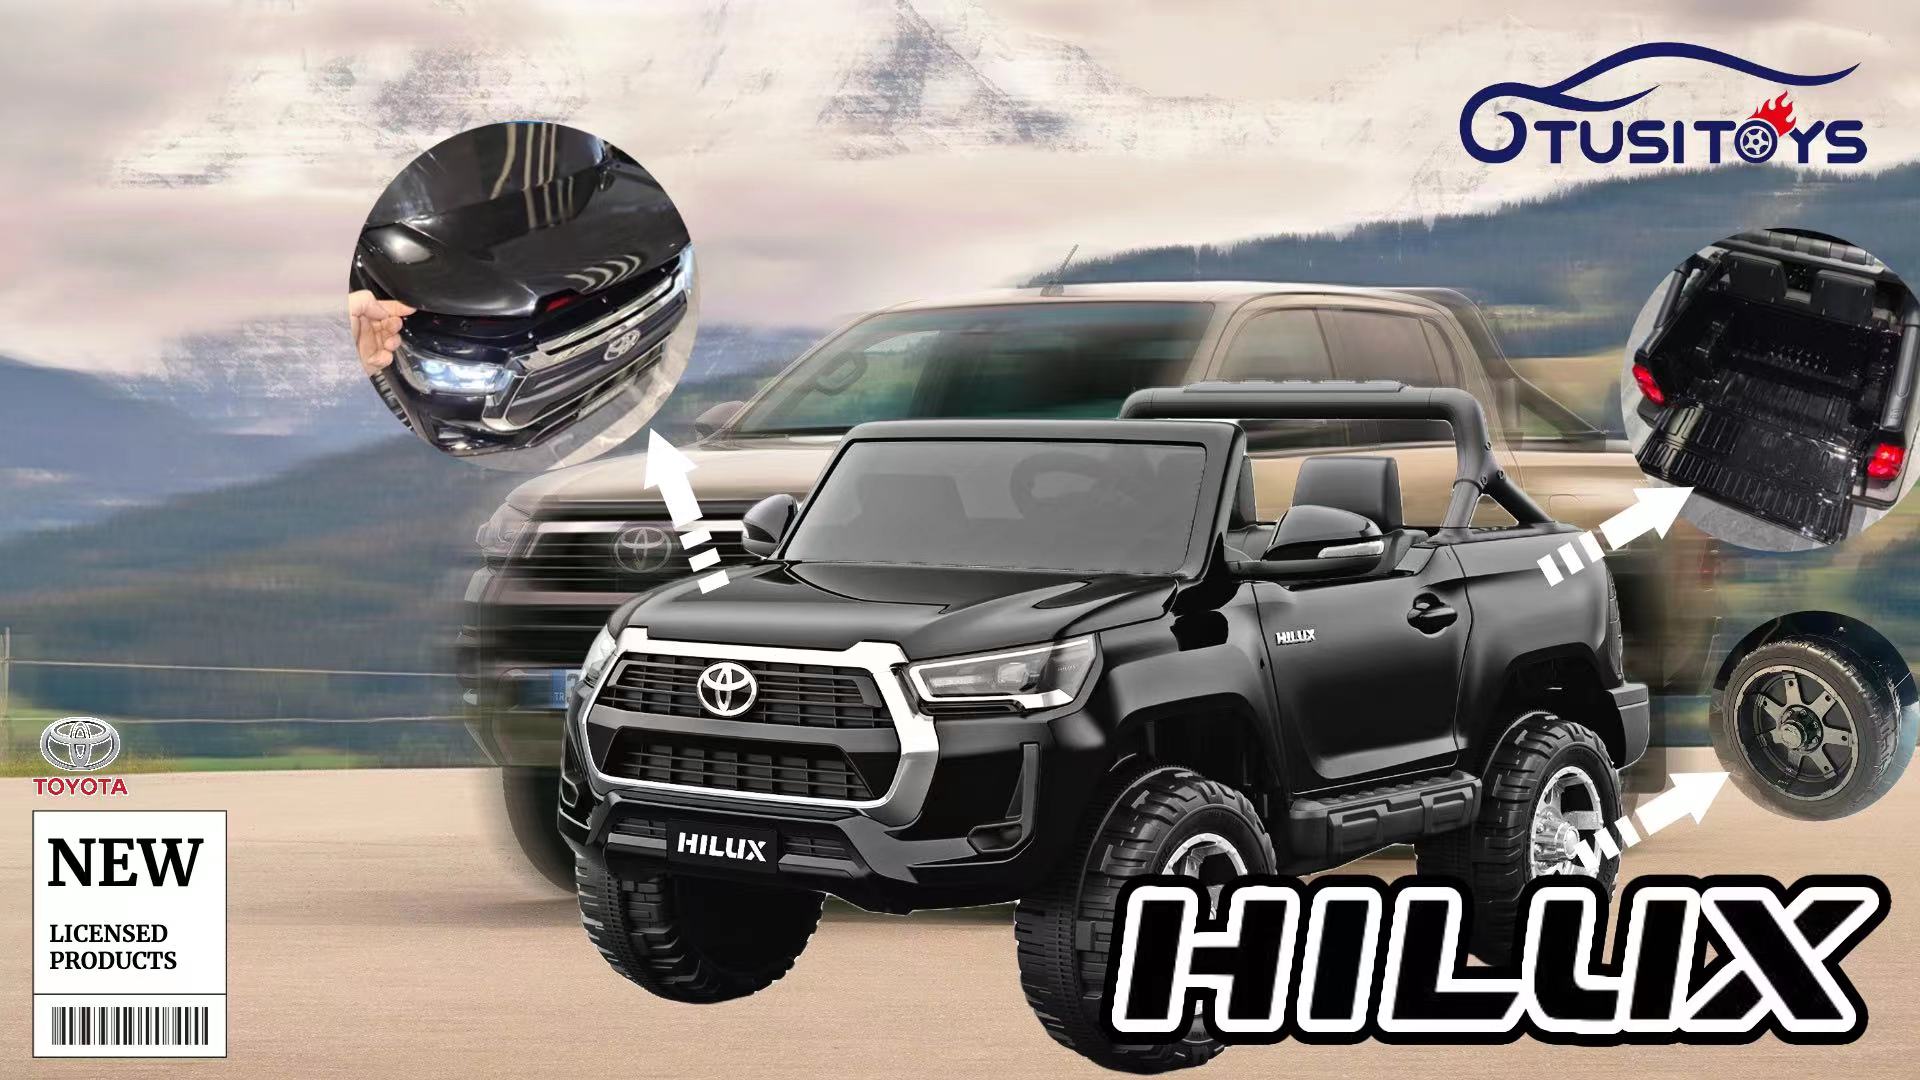 Look what will you only get from this licensed toyota Hilux ride on? 